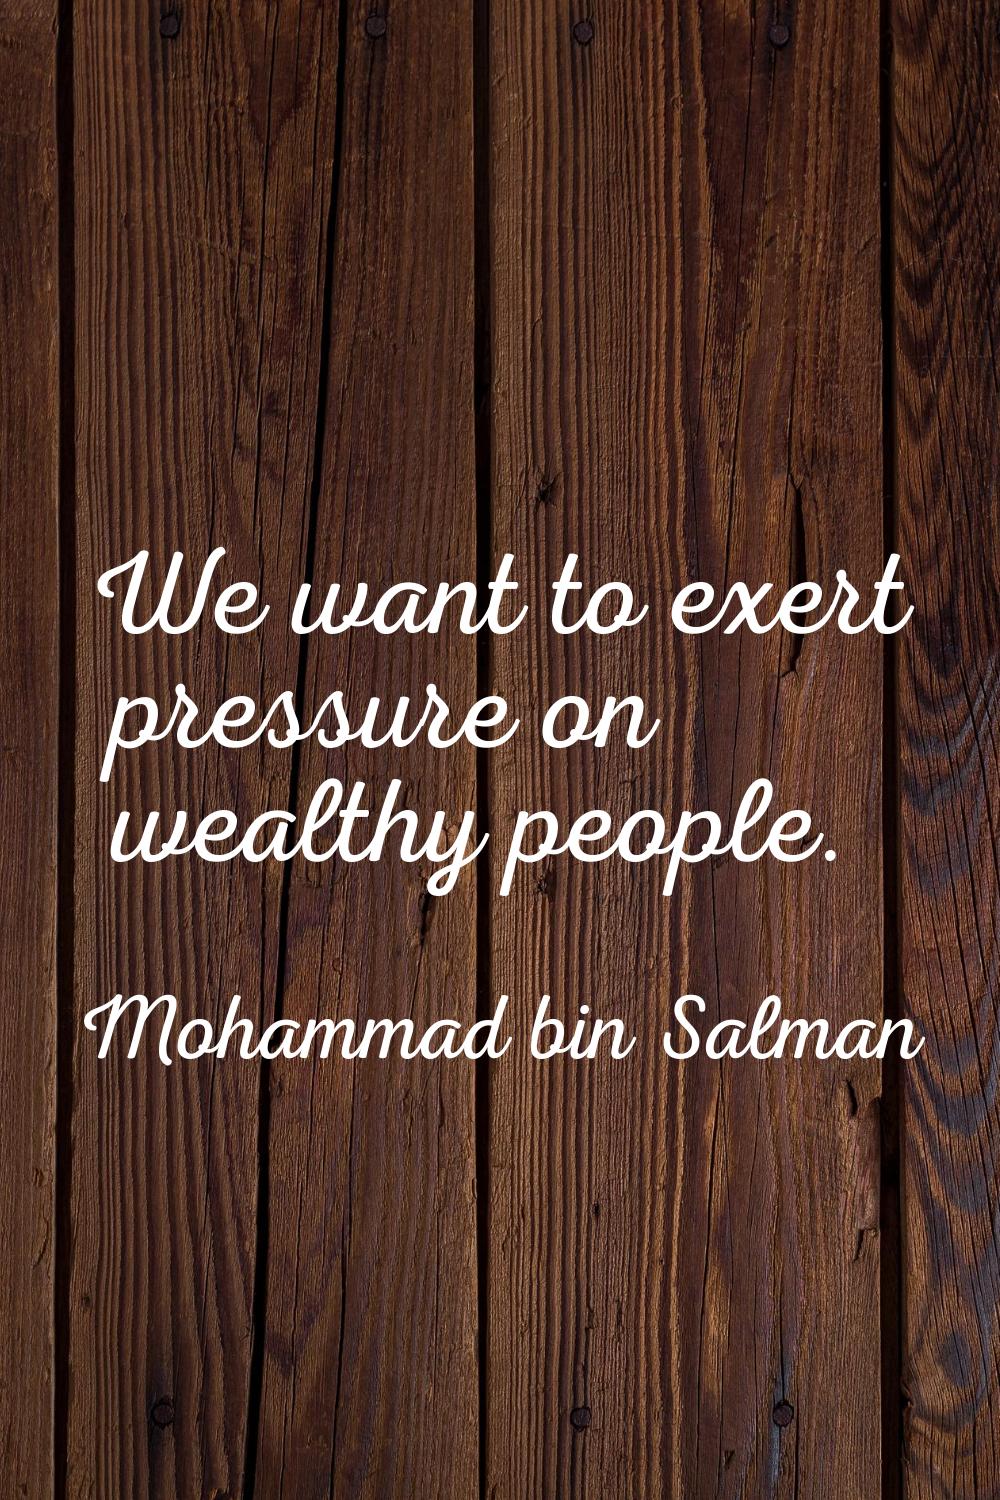 We want to exert pressure on wealthy people.